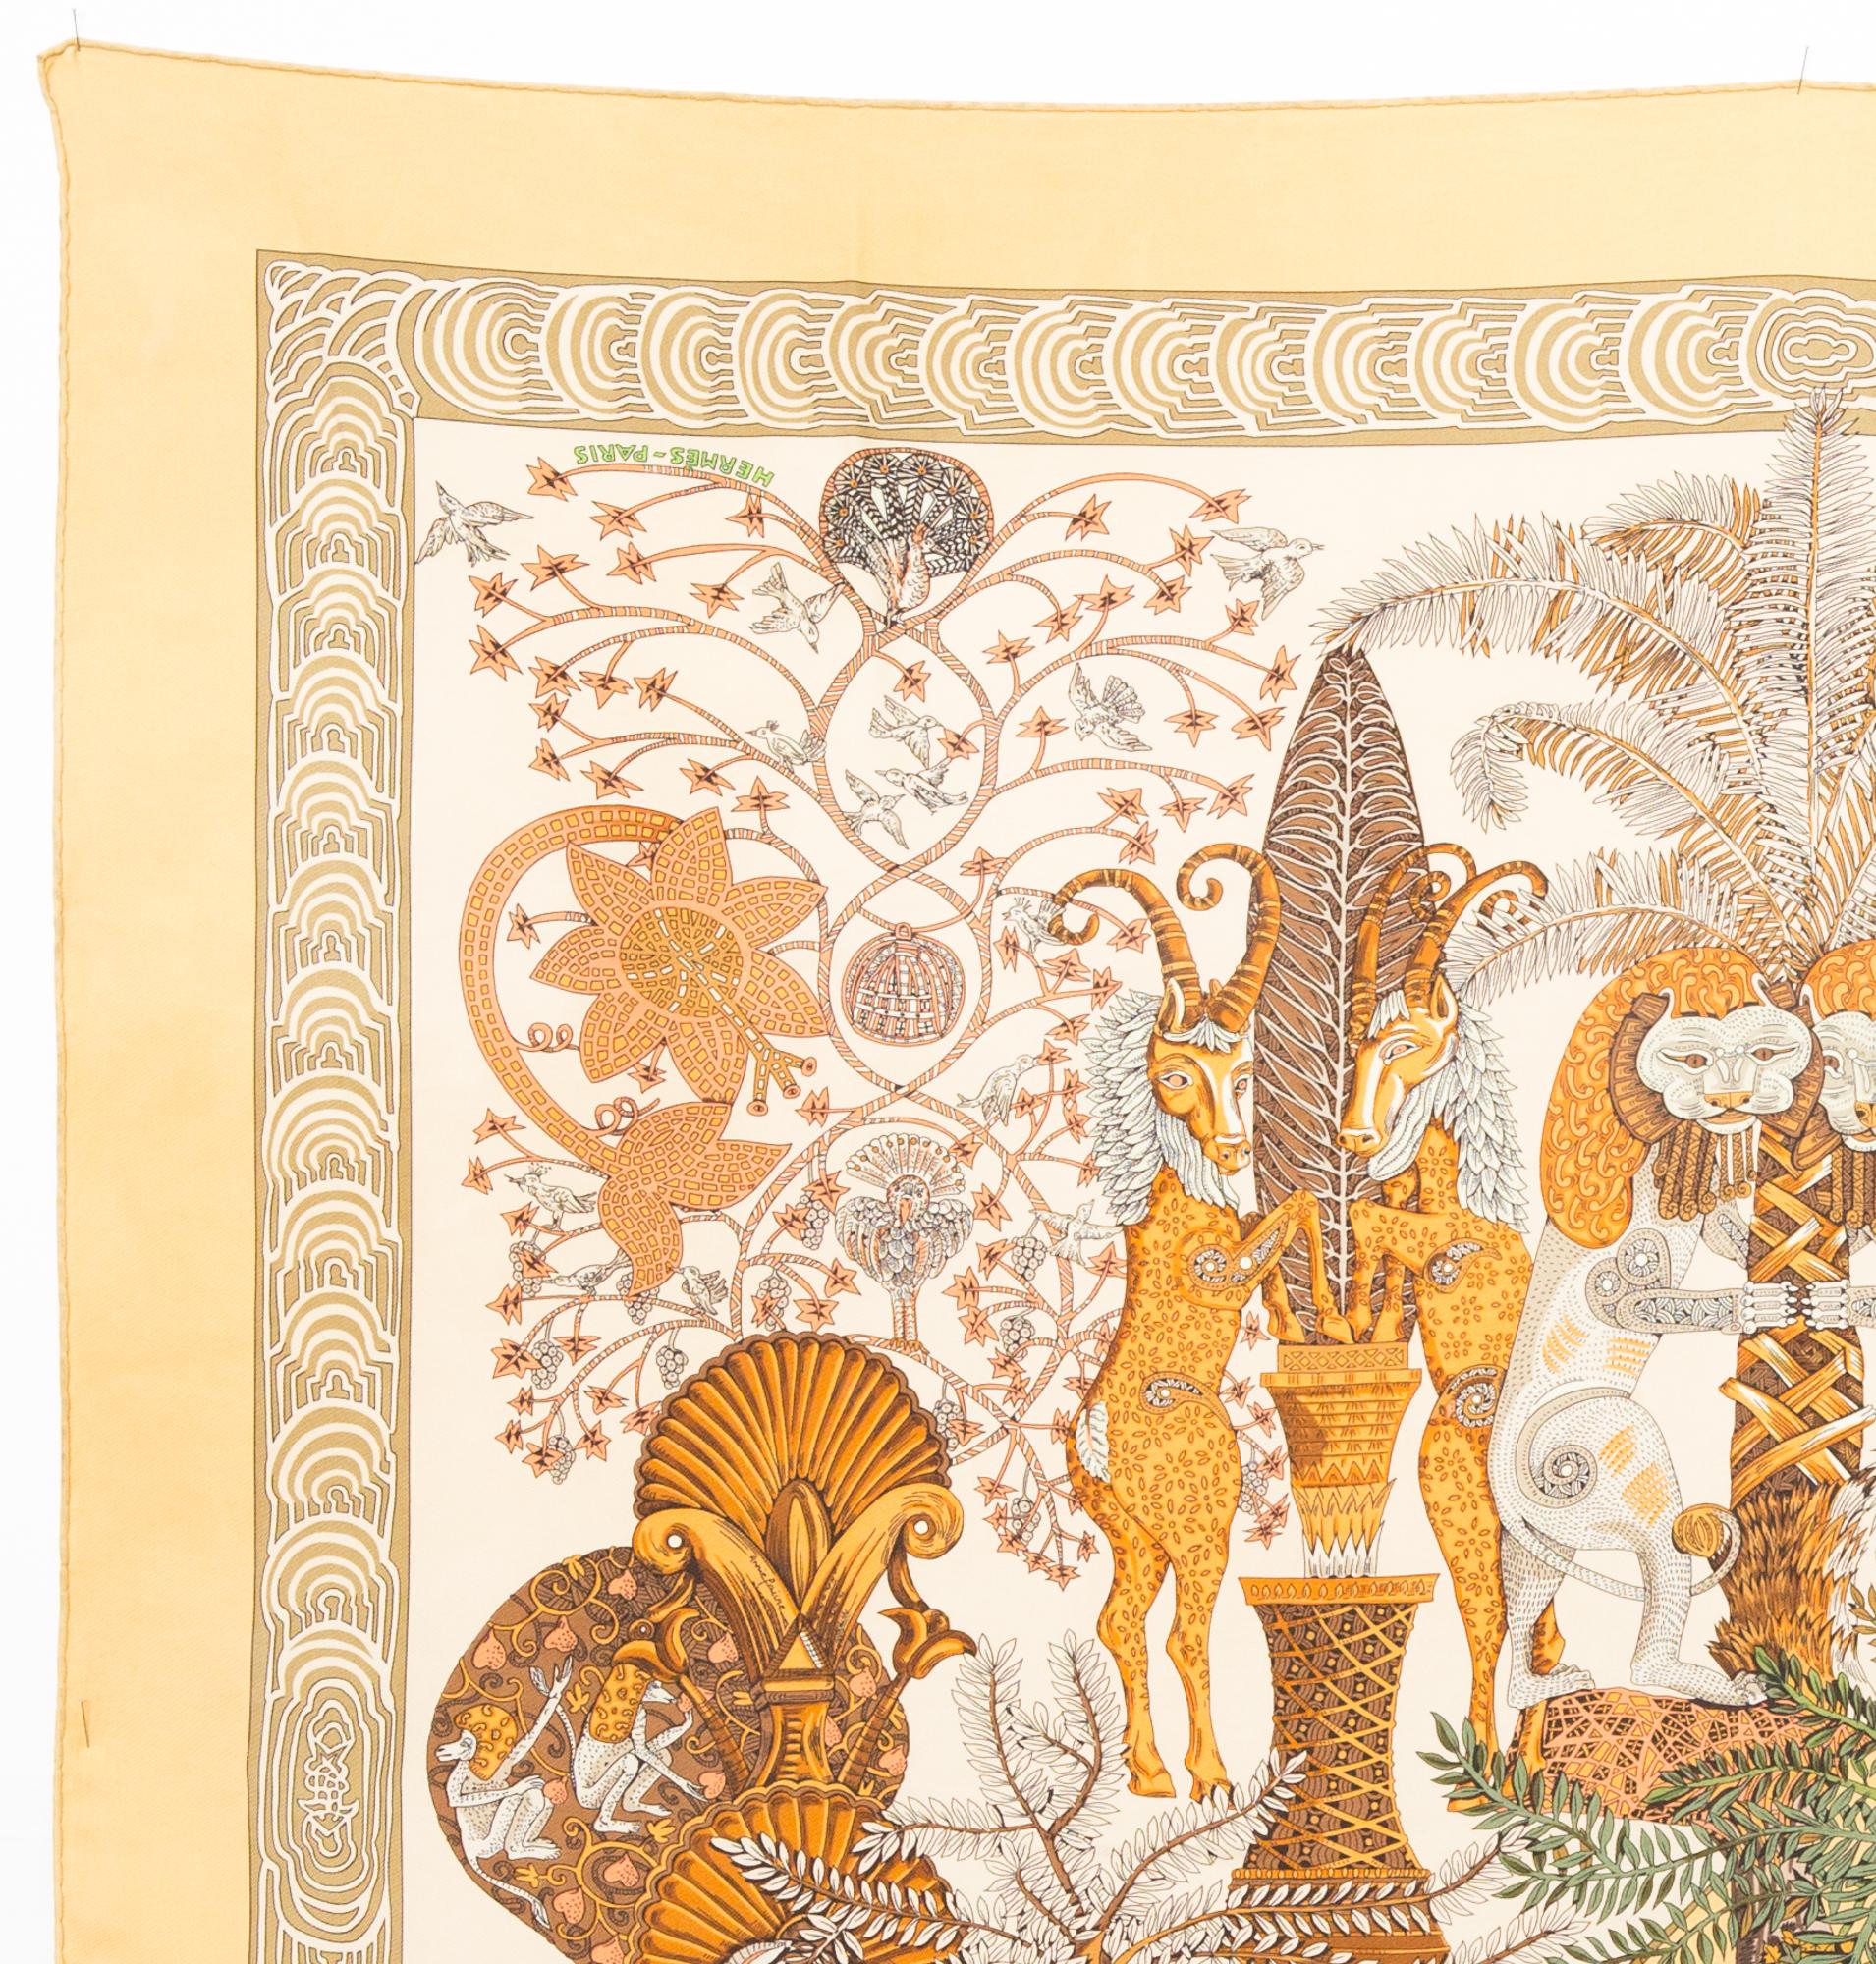 Hermes silk scarf Les Legendes de l’Arbre… by Annie Faivre featuring featuring a yellow border and a Hermès signature. 
Circa 1998
In good vintage condition. Made in France.
35,4in. (90cm)  X 35,4in. (90cm)
We guarantee you will receive this  iconic